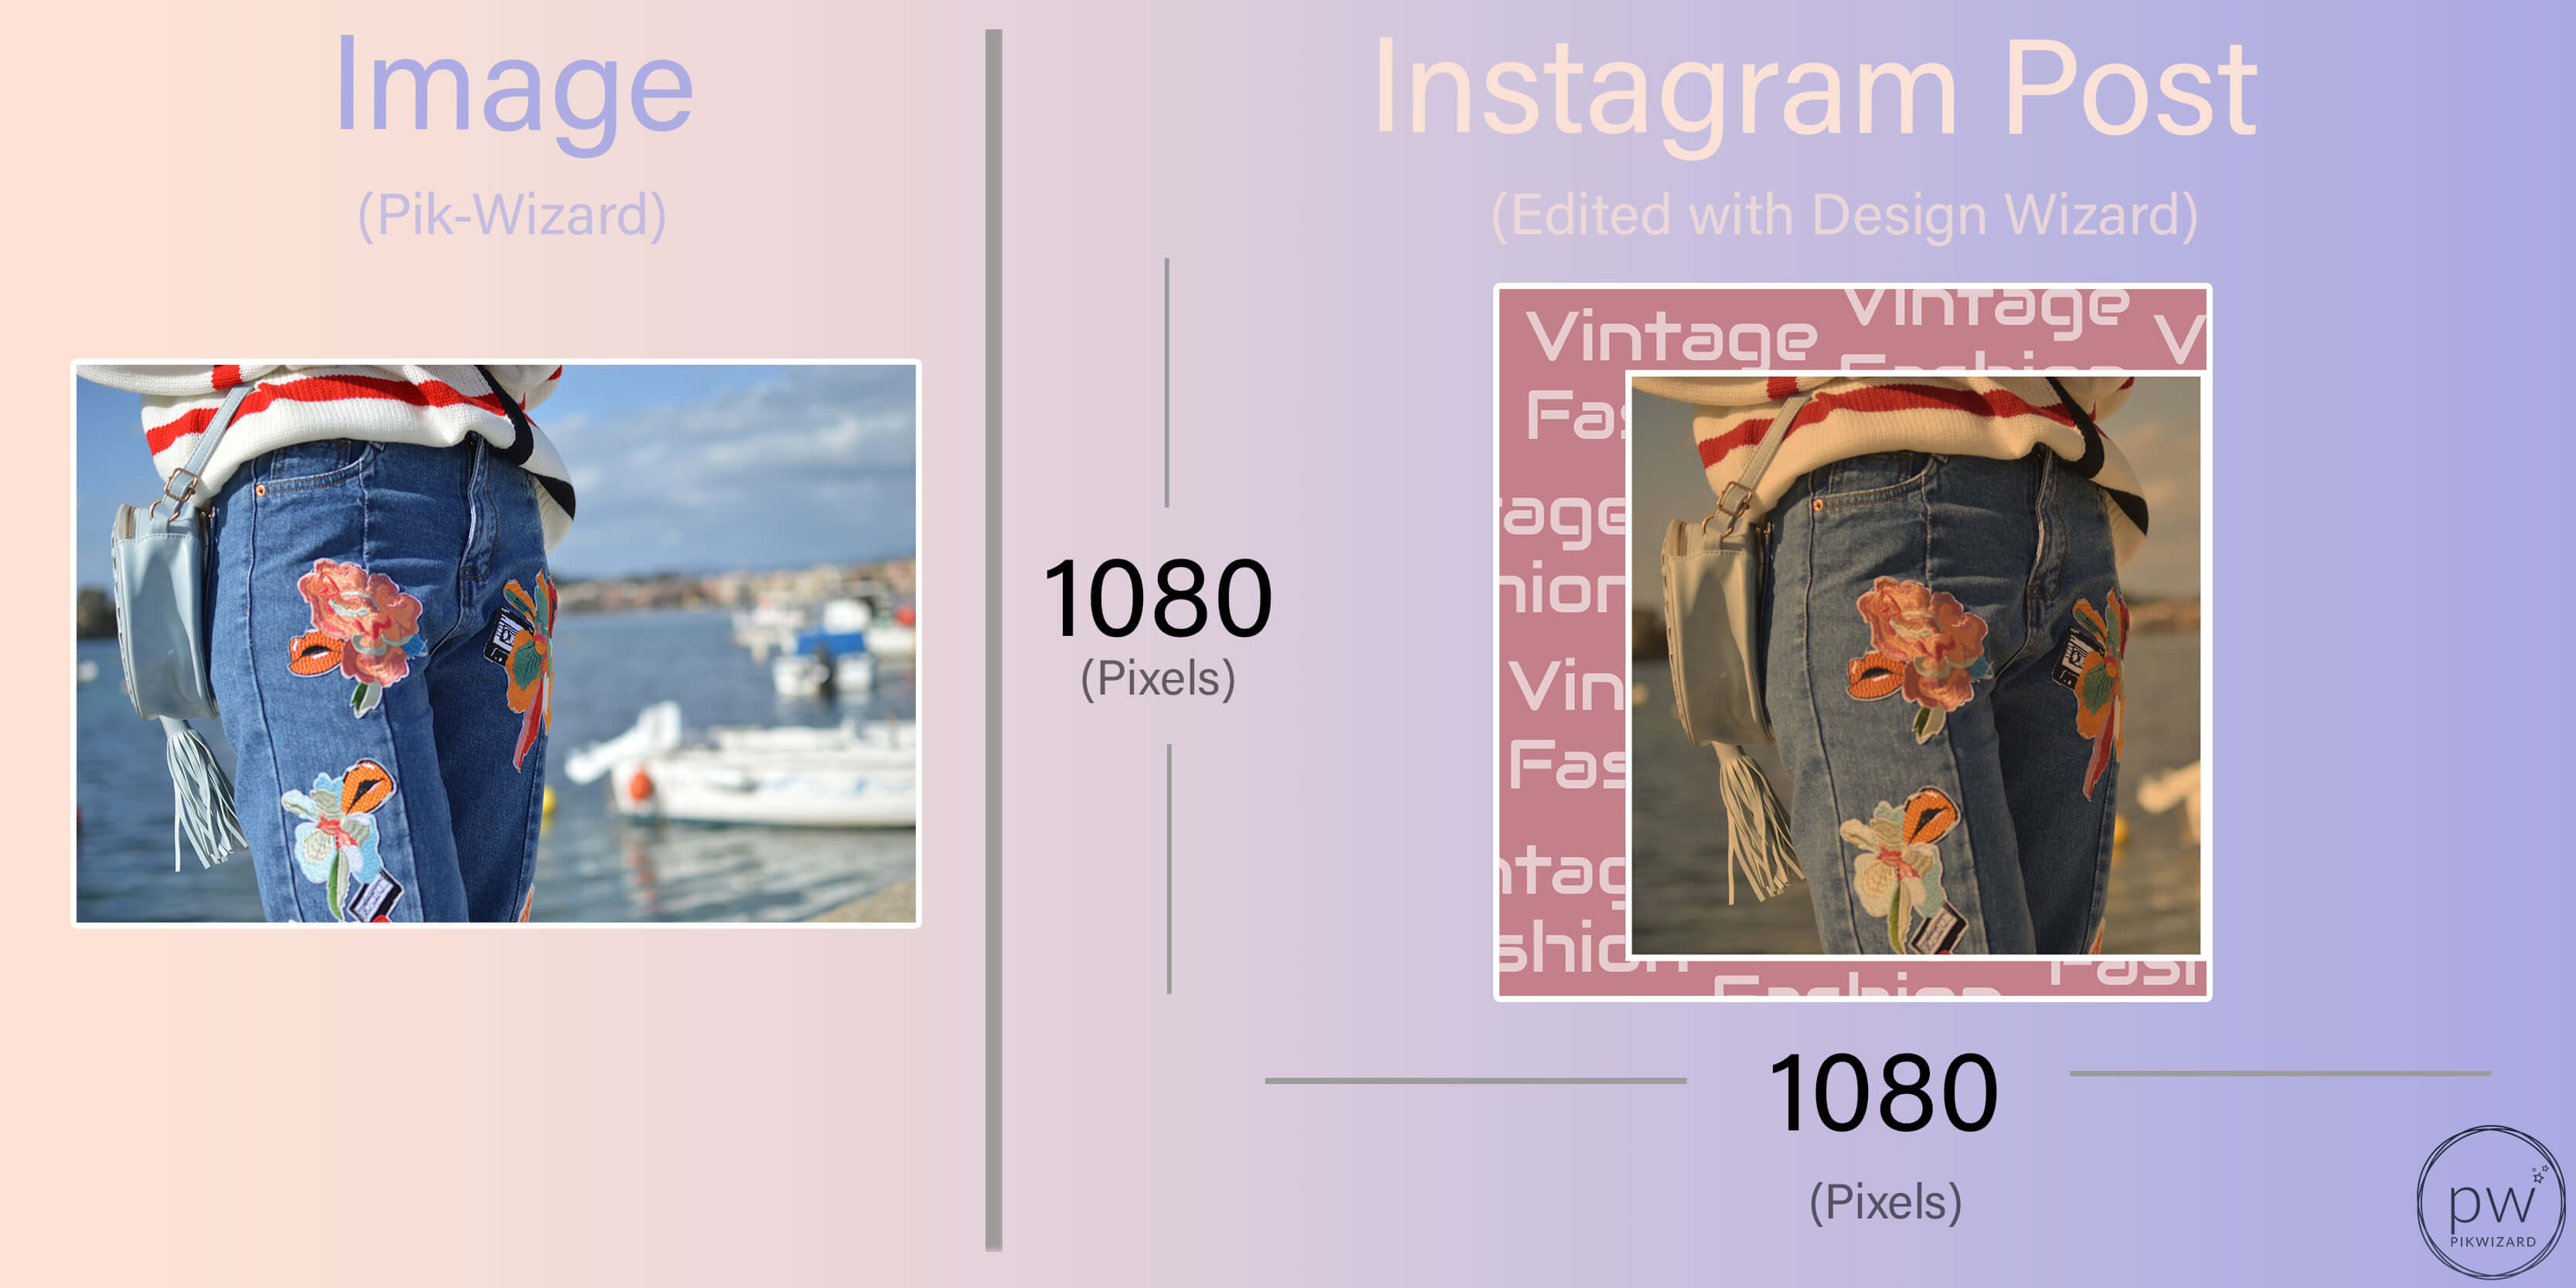 Side by side stock image and edited instagram post of vintage fashion - A complete beginner's guide on how to post on Instagram from a PC or Mac - Image